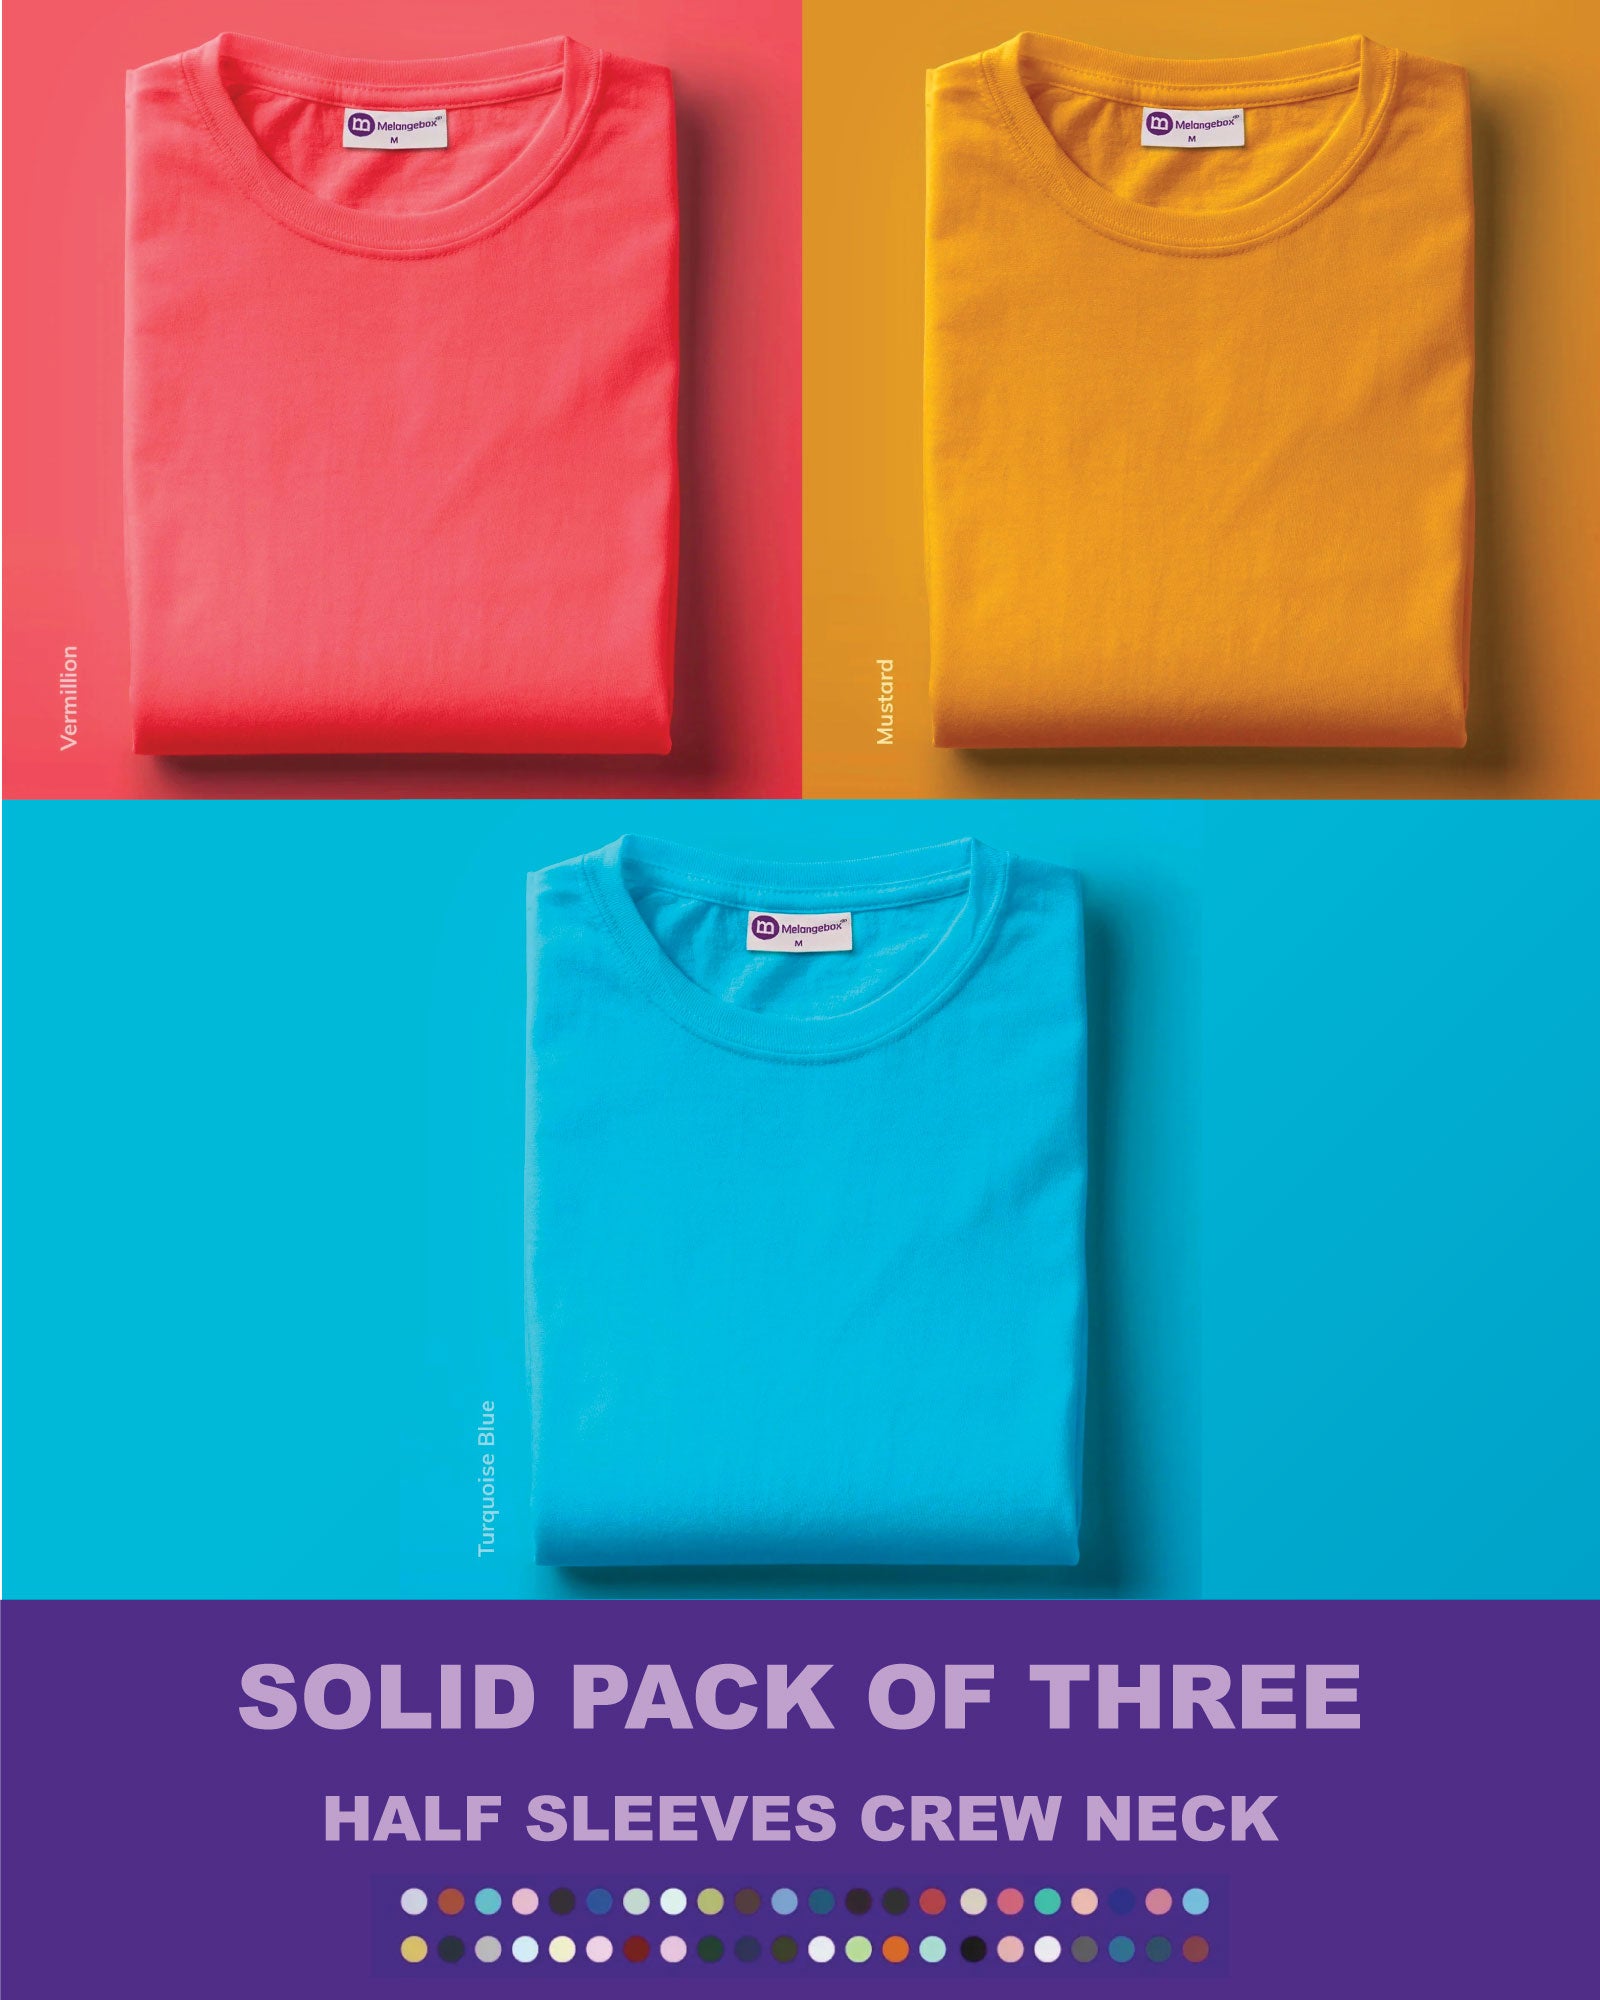 Solid Pack of 3: Half Sleeves Crew Neck